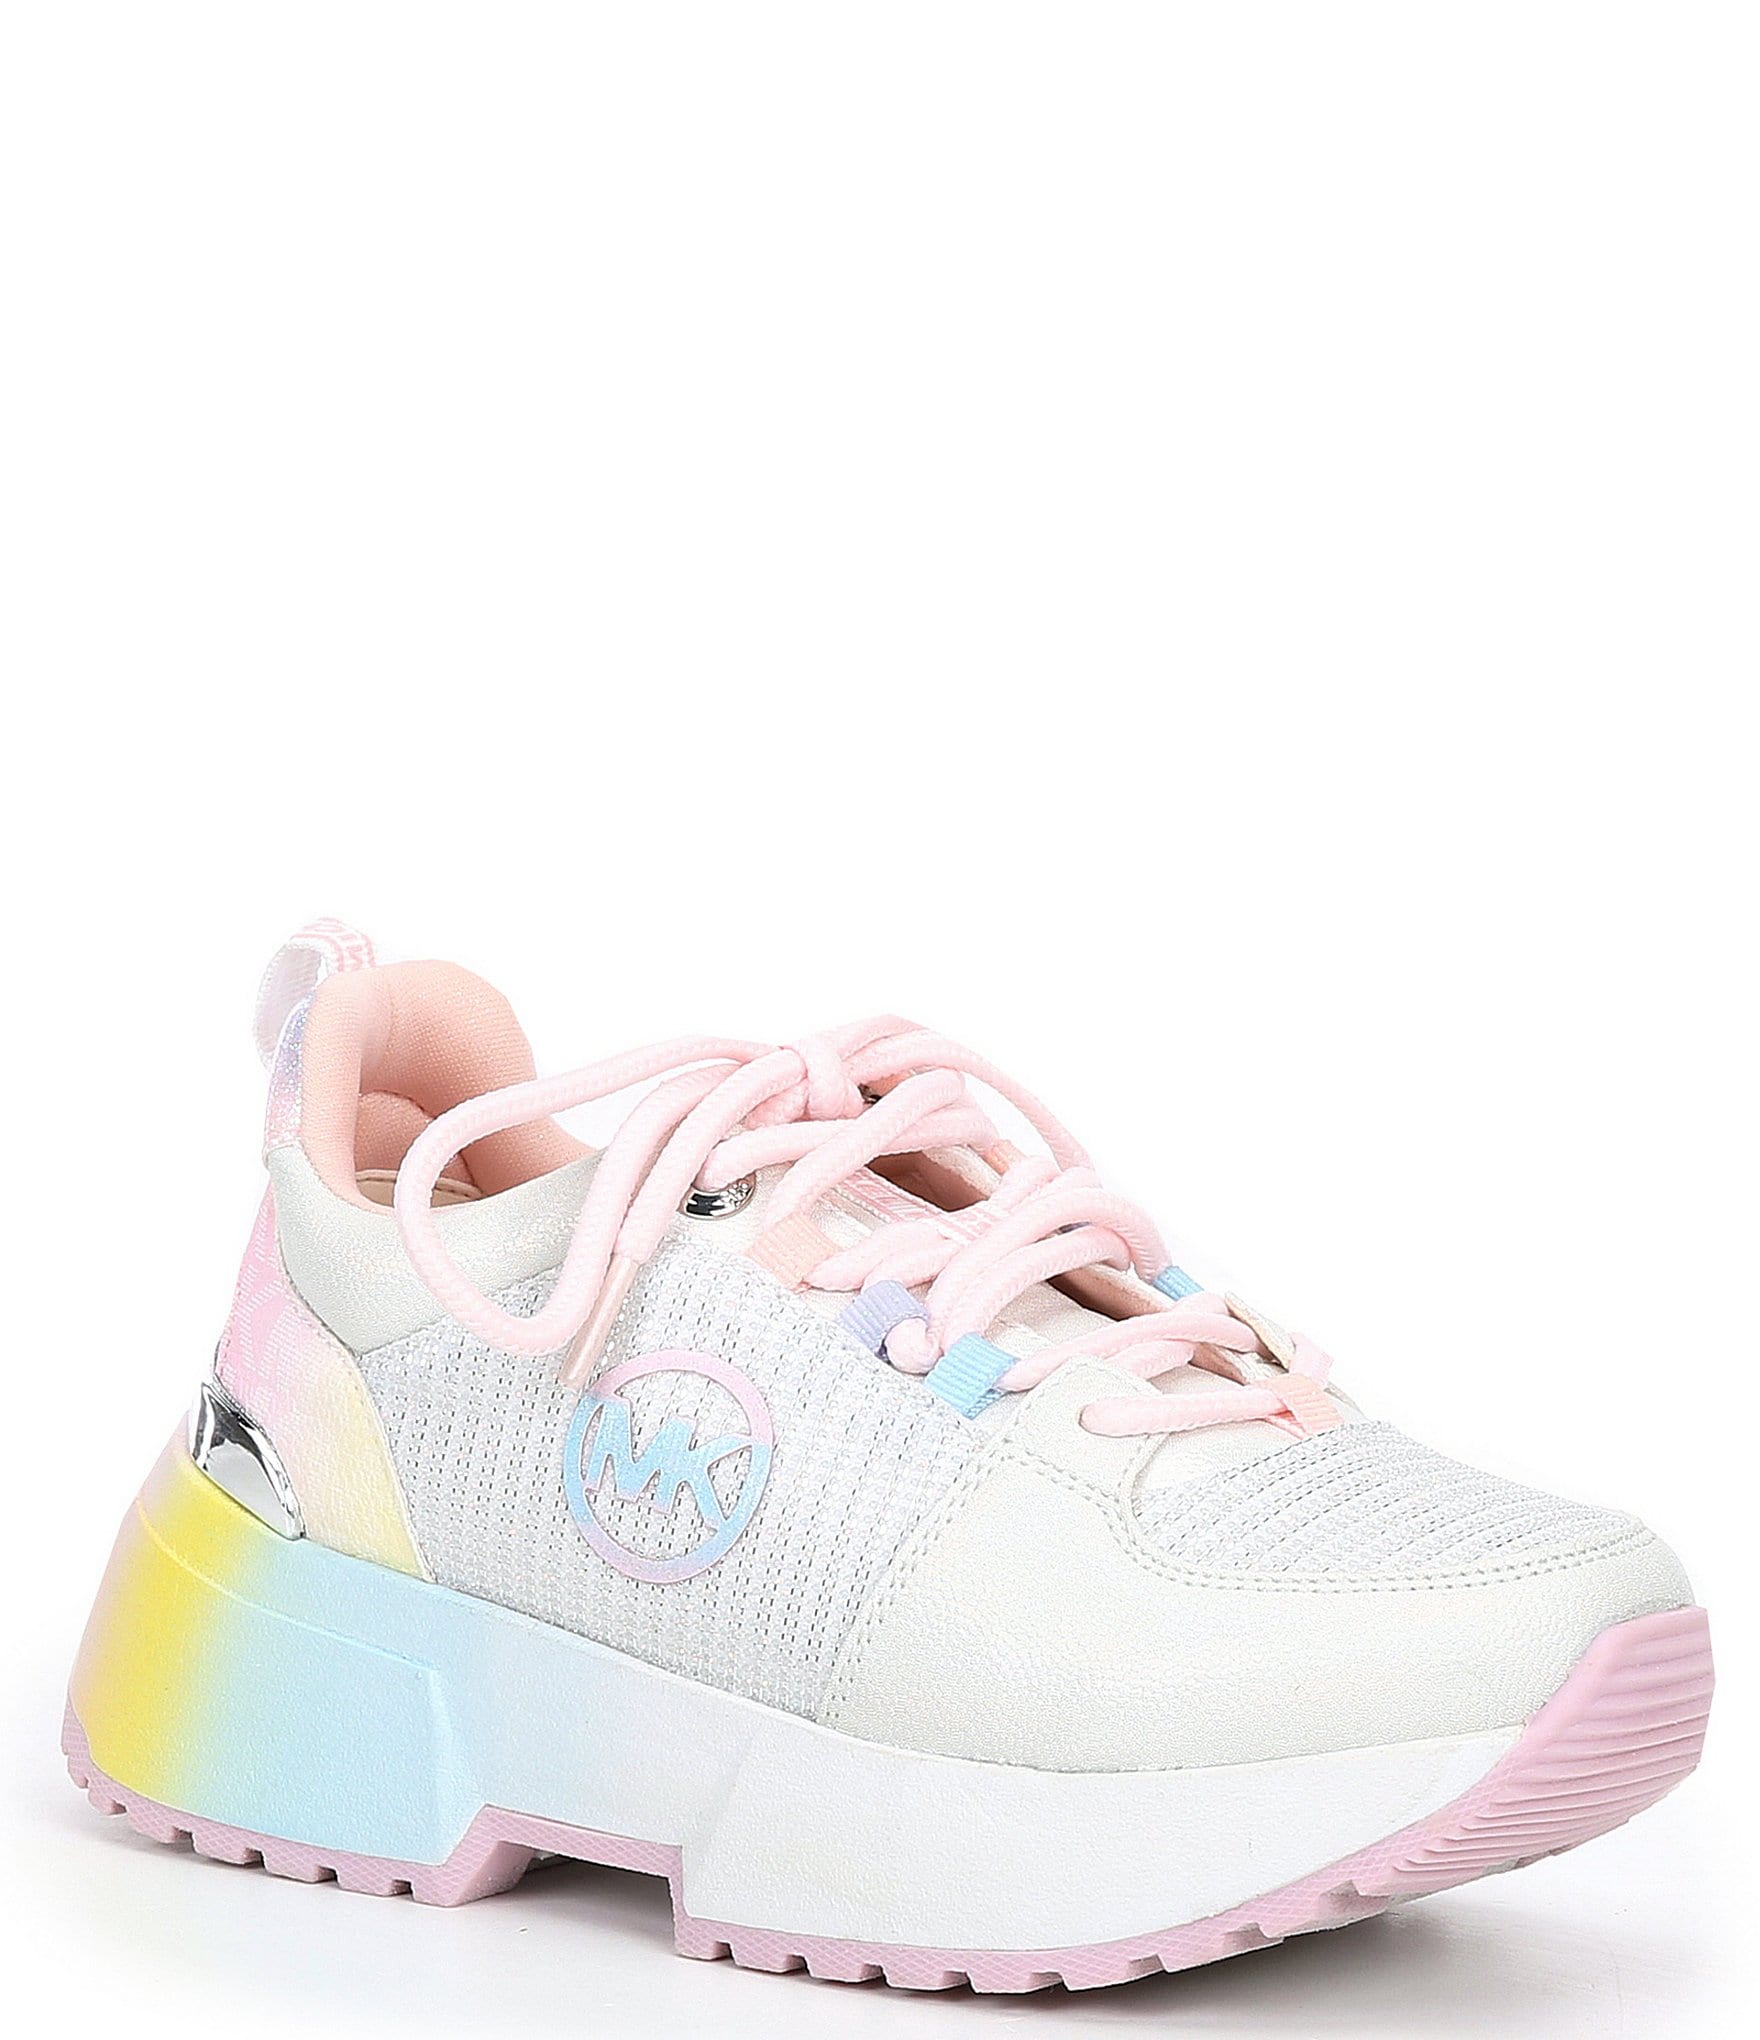 MICHAEL KORS sneakers Cosmo Sport White for girls  NICKIScom